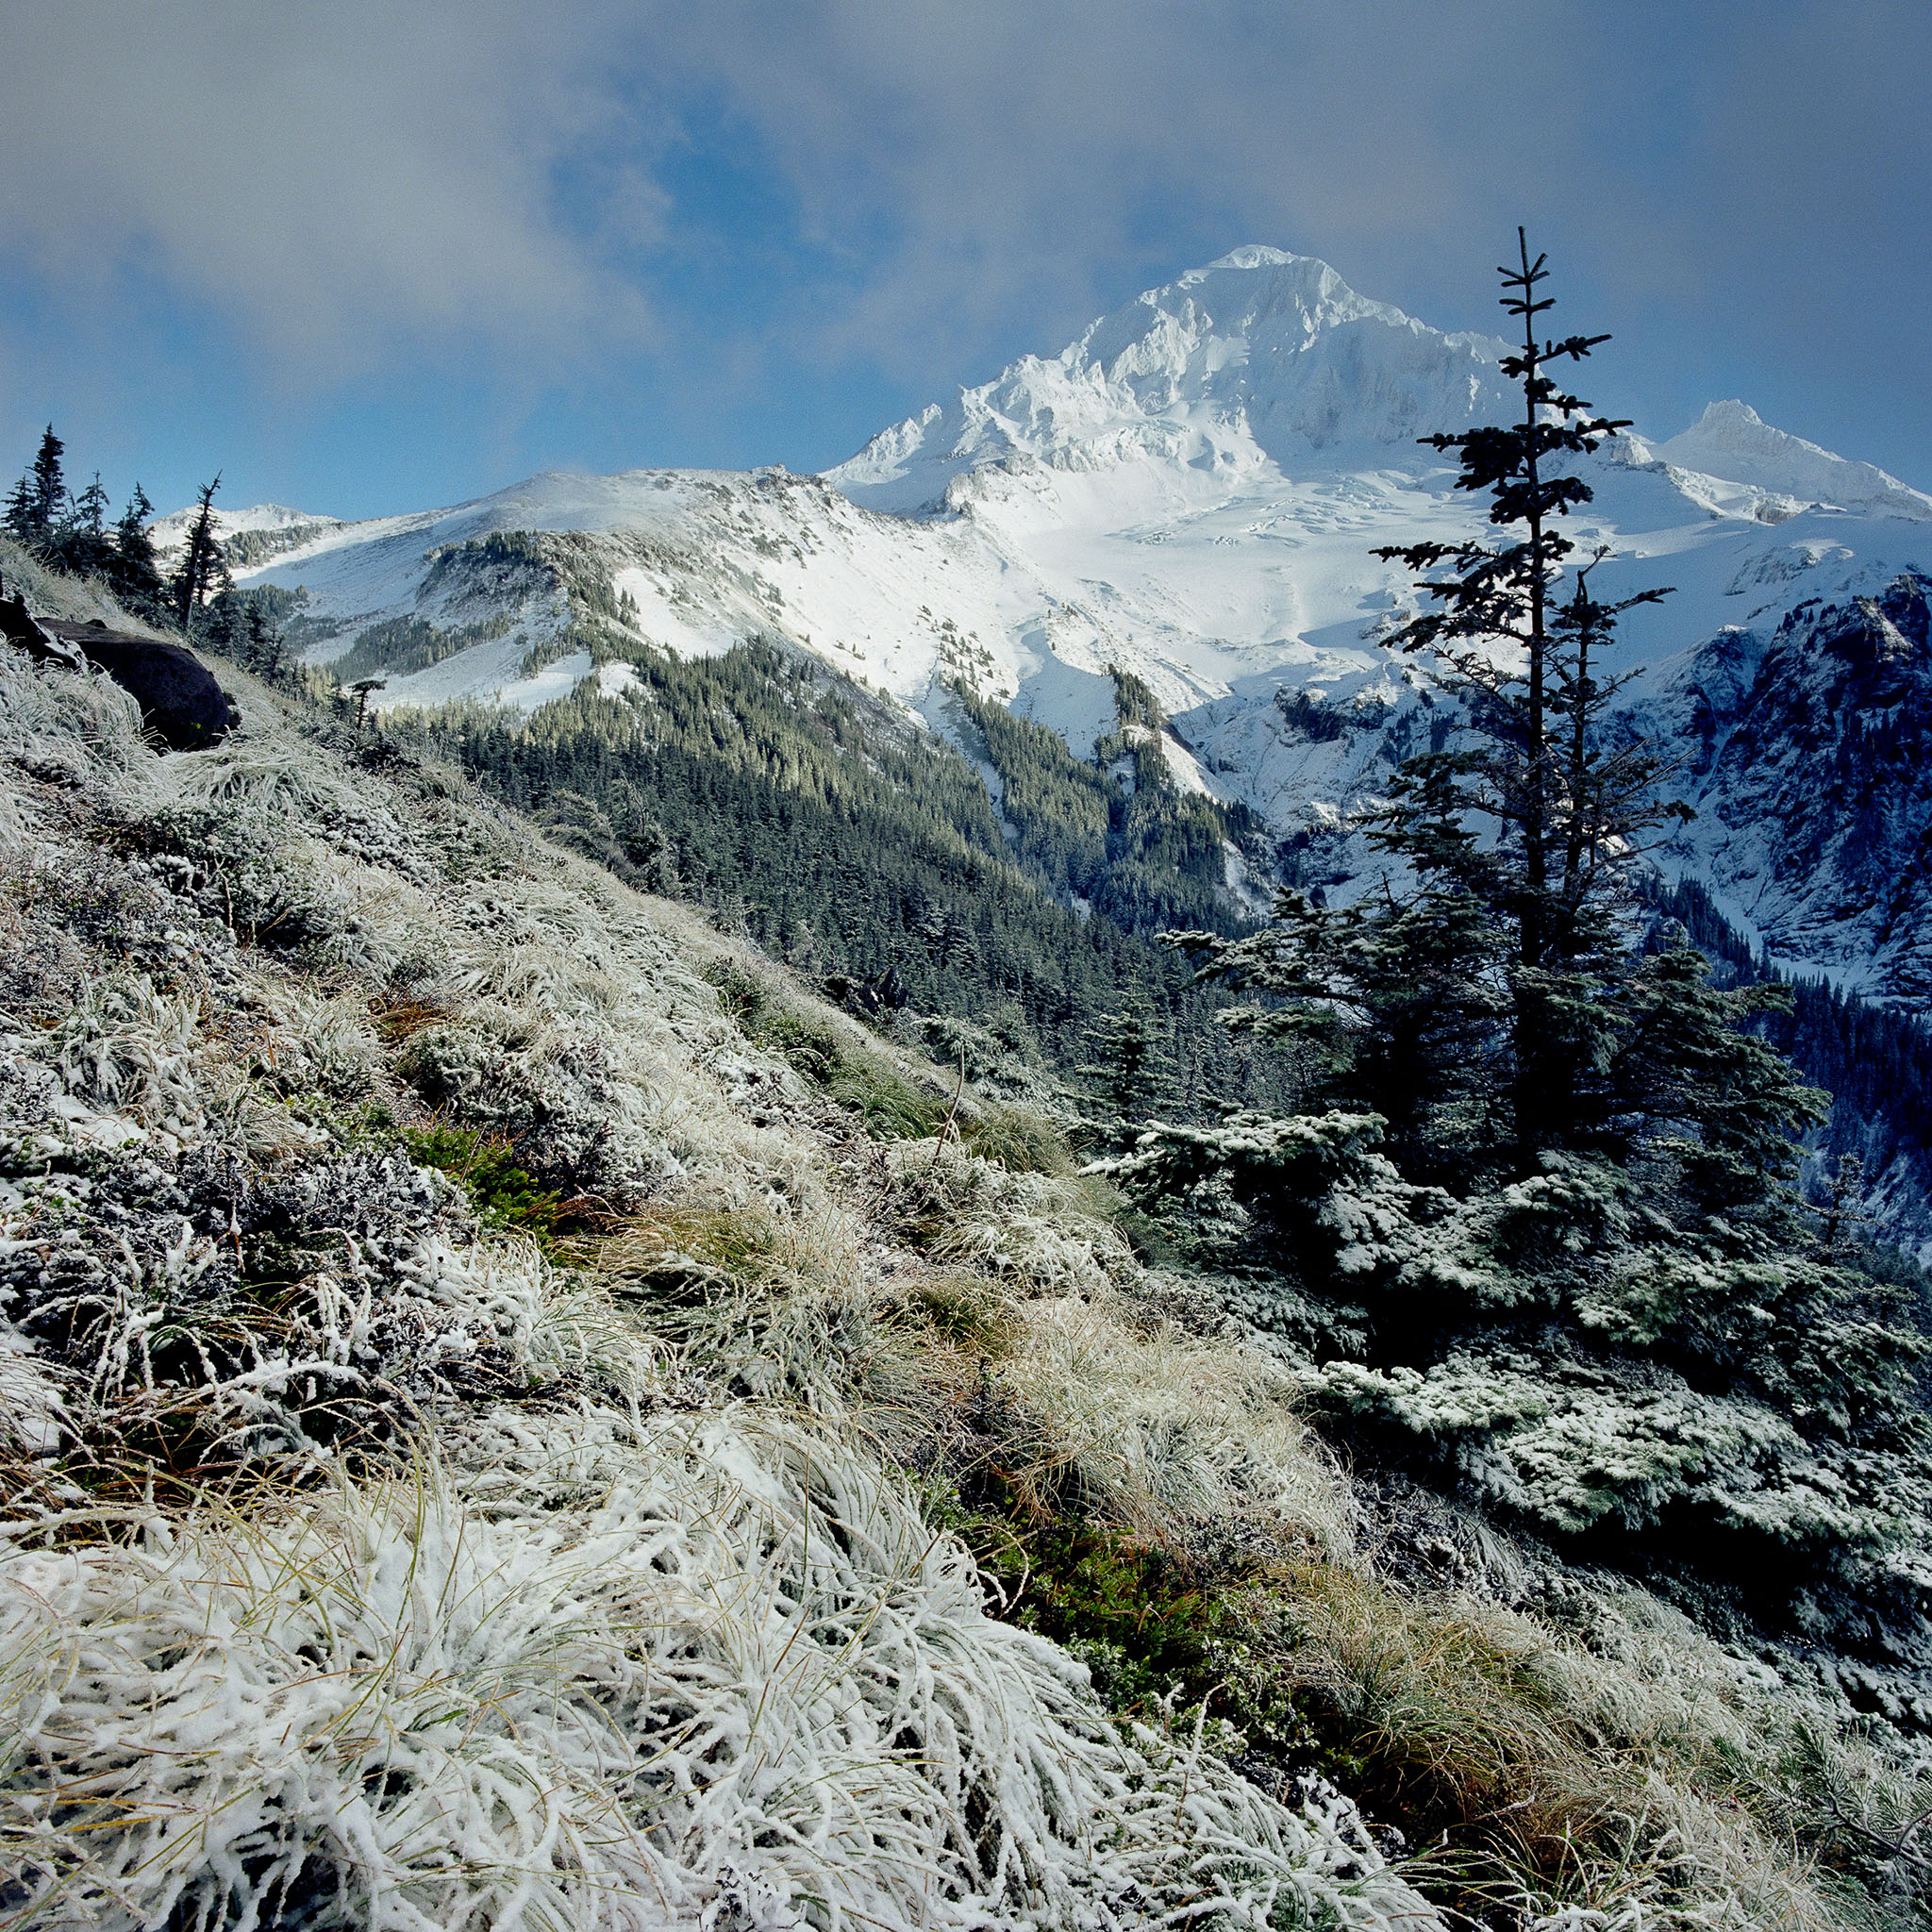 mcneil-point-frost-mt-hood-national-forest-or-8x8.jpg